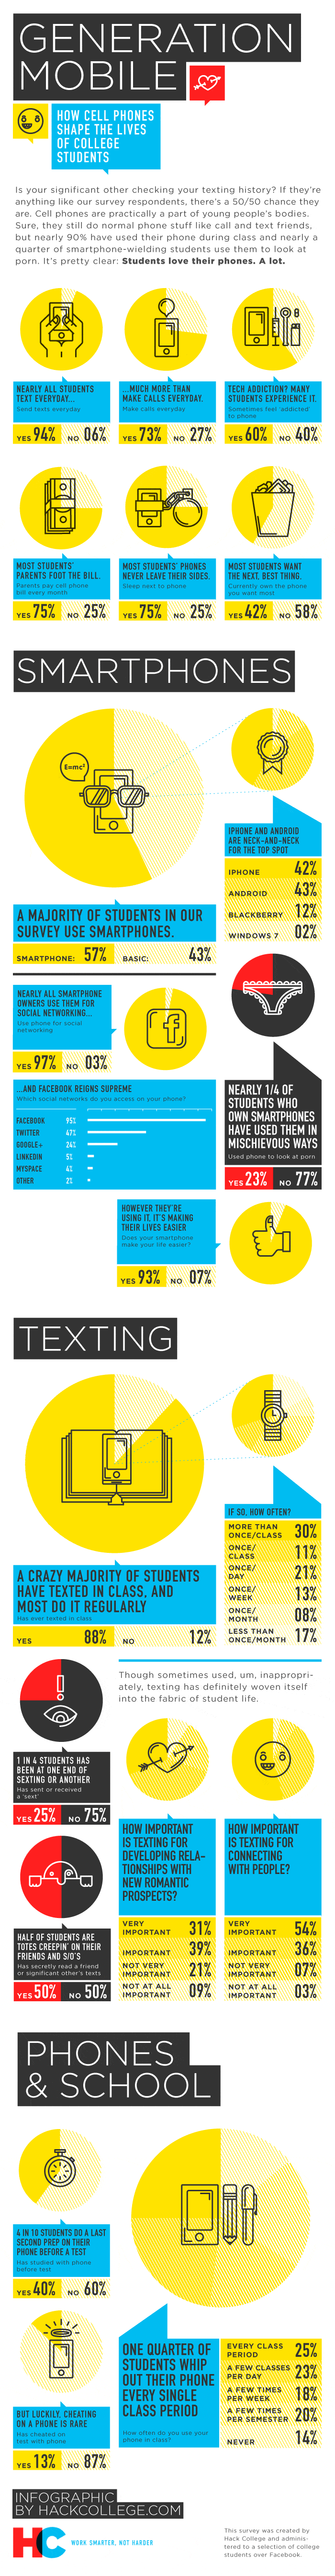 How Cell Phones Shape the Lives of College Students Infographic